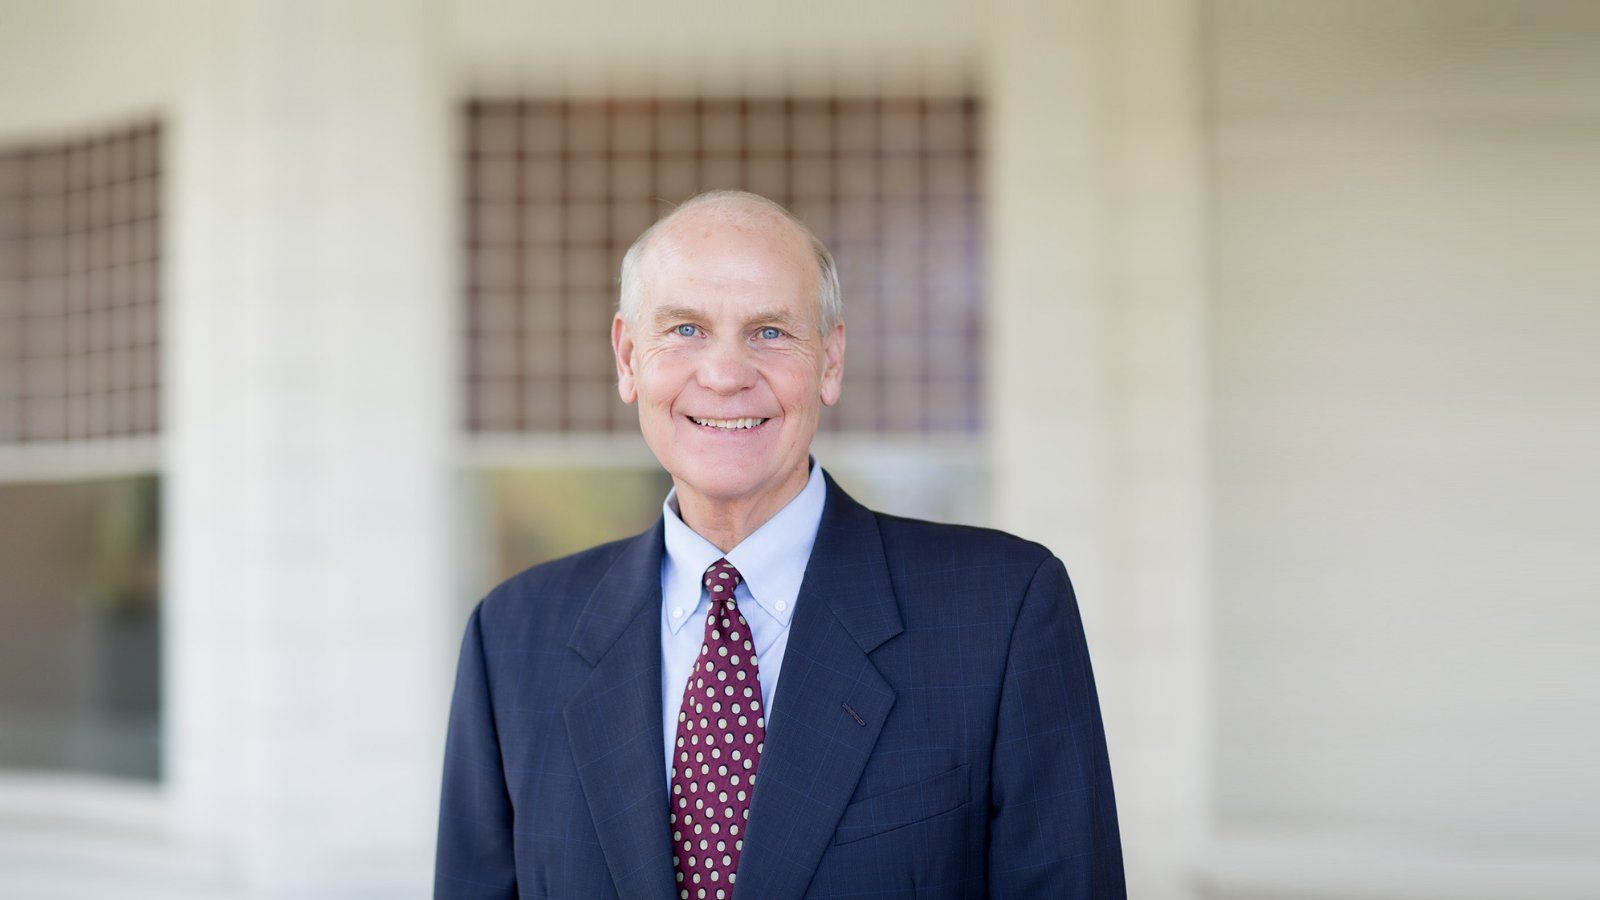 PLNU President, Dr. Brower in front of Mieras Hall